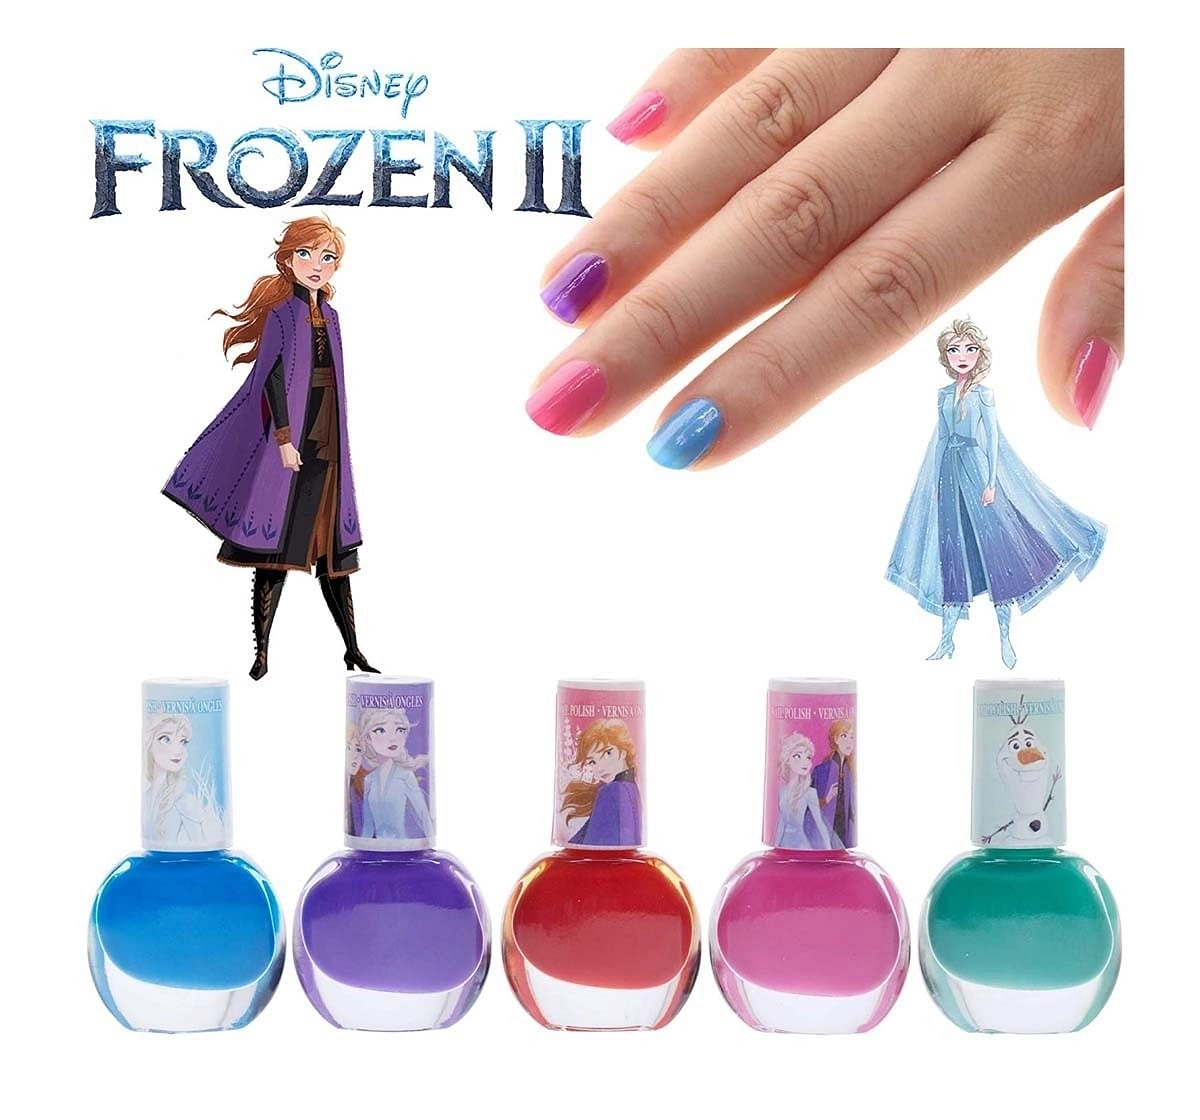 Melissa & Doug Disney Frozen 2 - 16 Piece Lip Balm Cosmetic Gift Set With Light-Up Mirror Toileteries And Makeup for Kids Age 3Y+